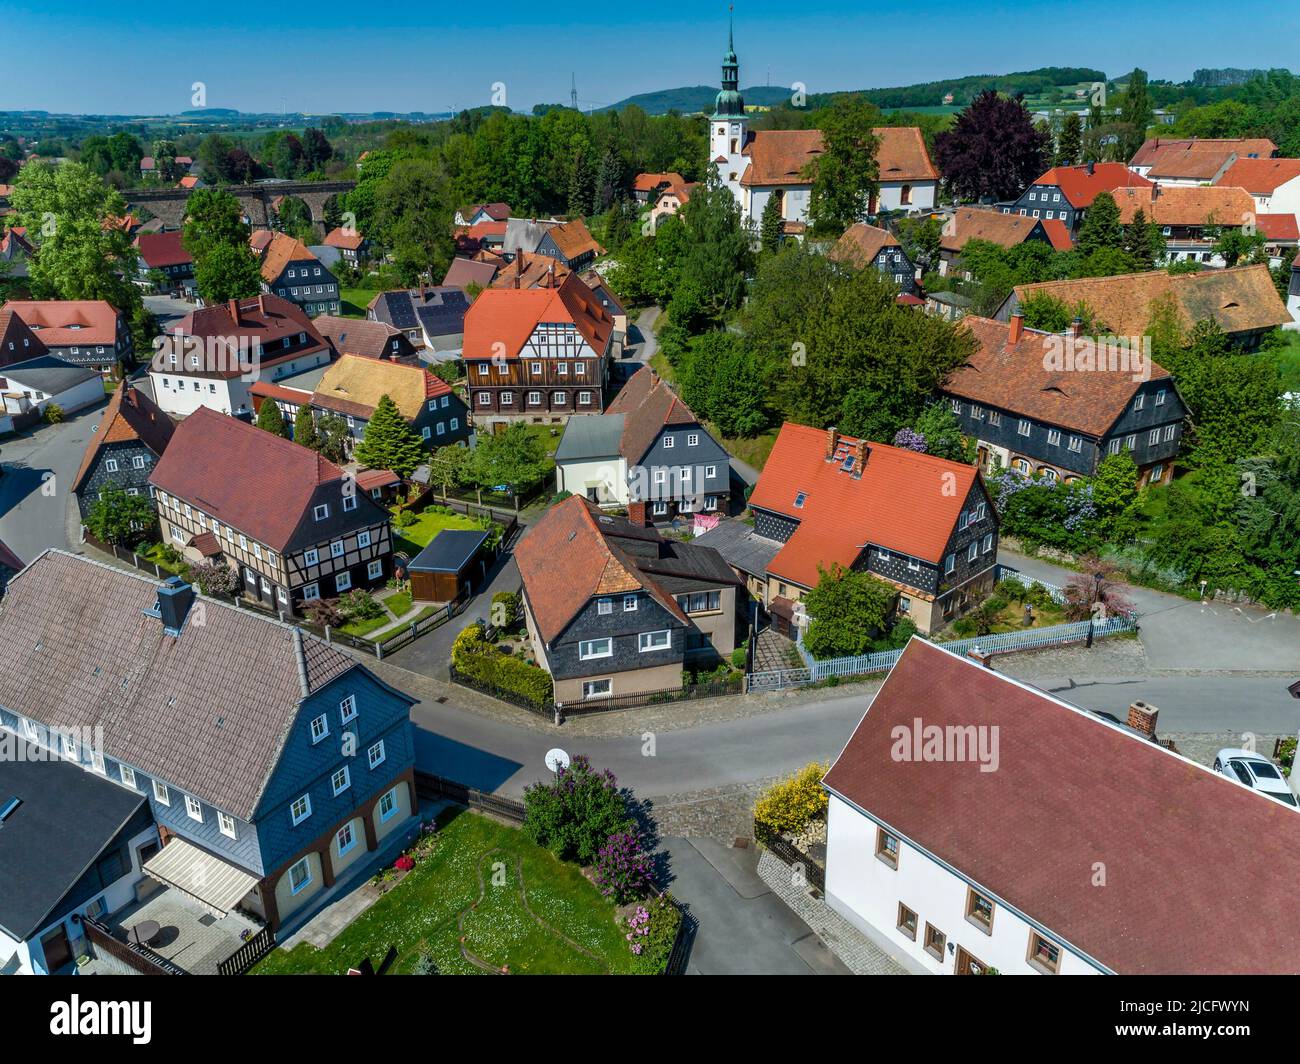 Half-timbered houses in Obercunnersdorf: The townscape of the state-recognized resort of Obercunnersdorf is characterized by over 250 Upper Lusatian half-timbered houses. Stock Photo